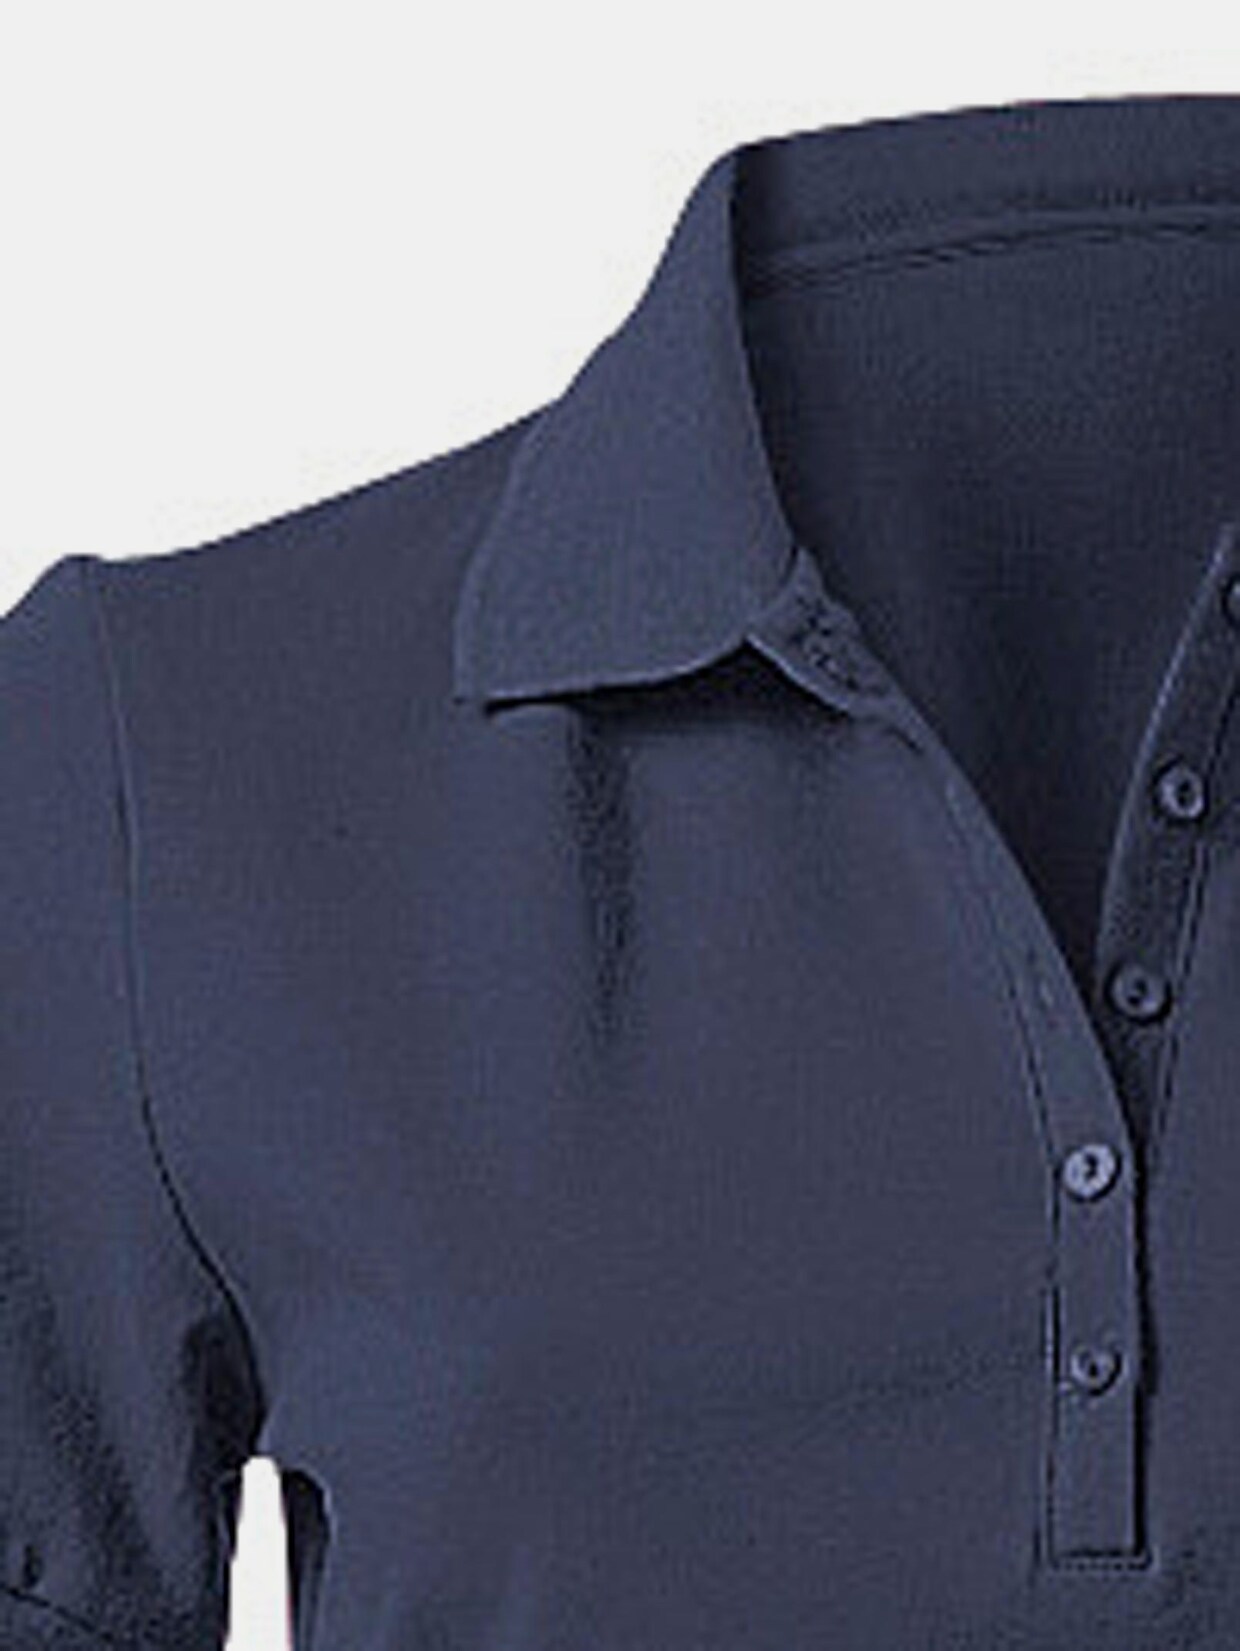 Best Connections Poloshirt - marine